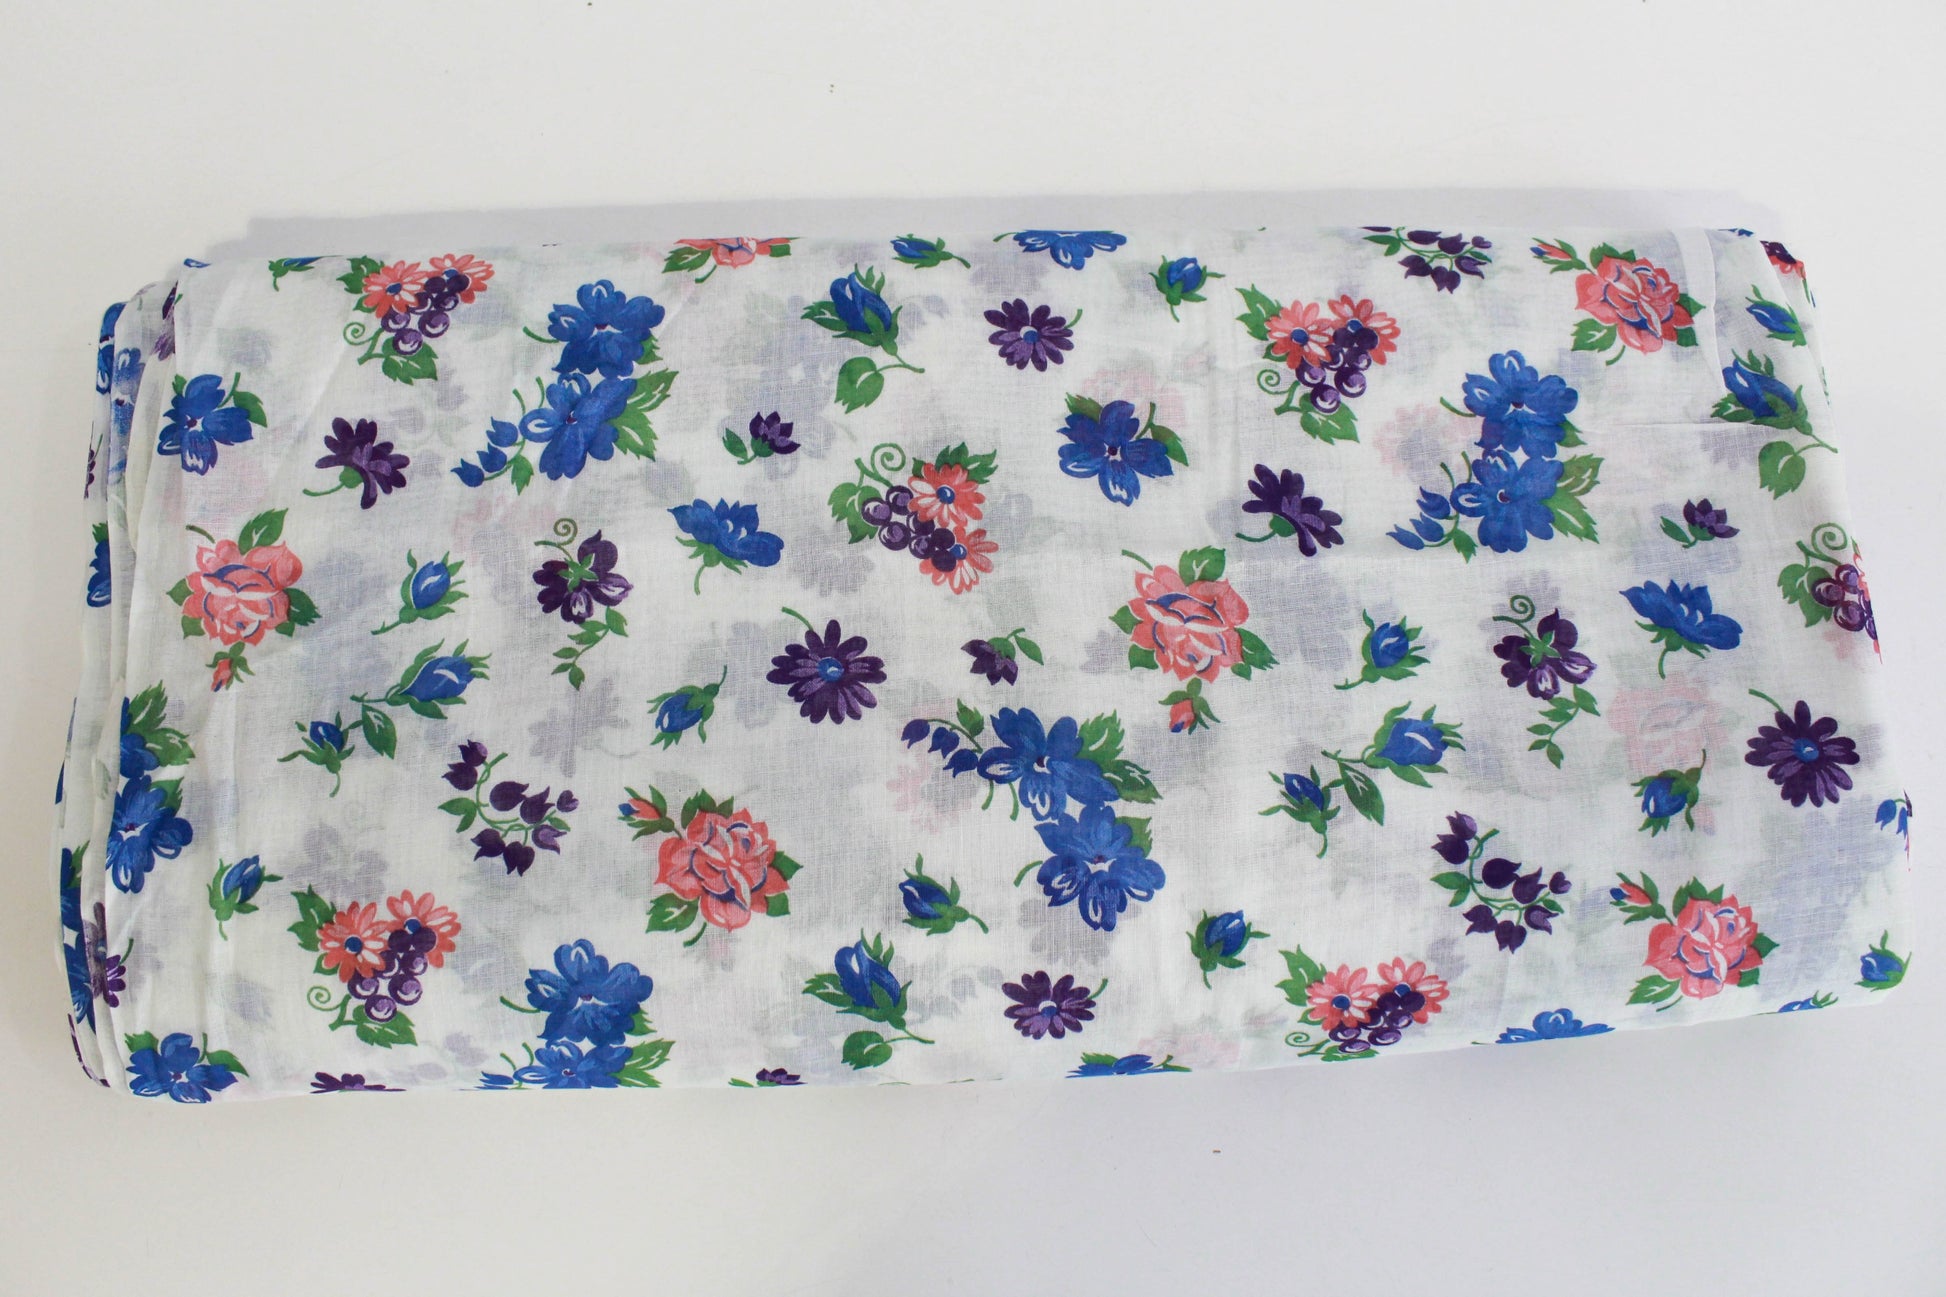 1940s cotton voile fabric sheer white with blue purple and pink flower print